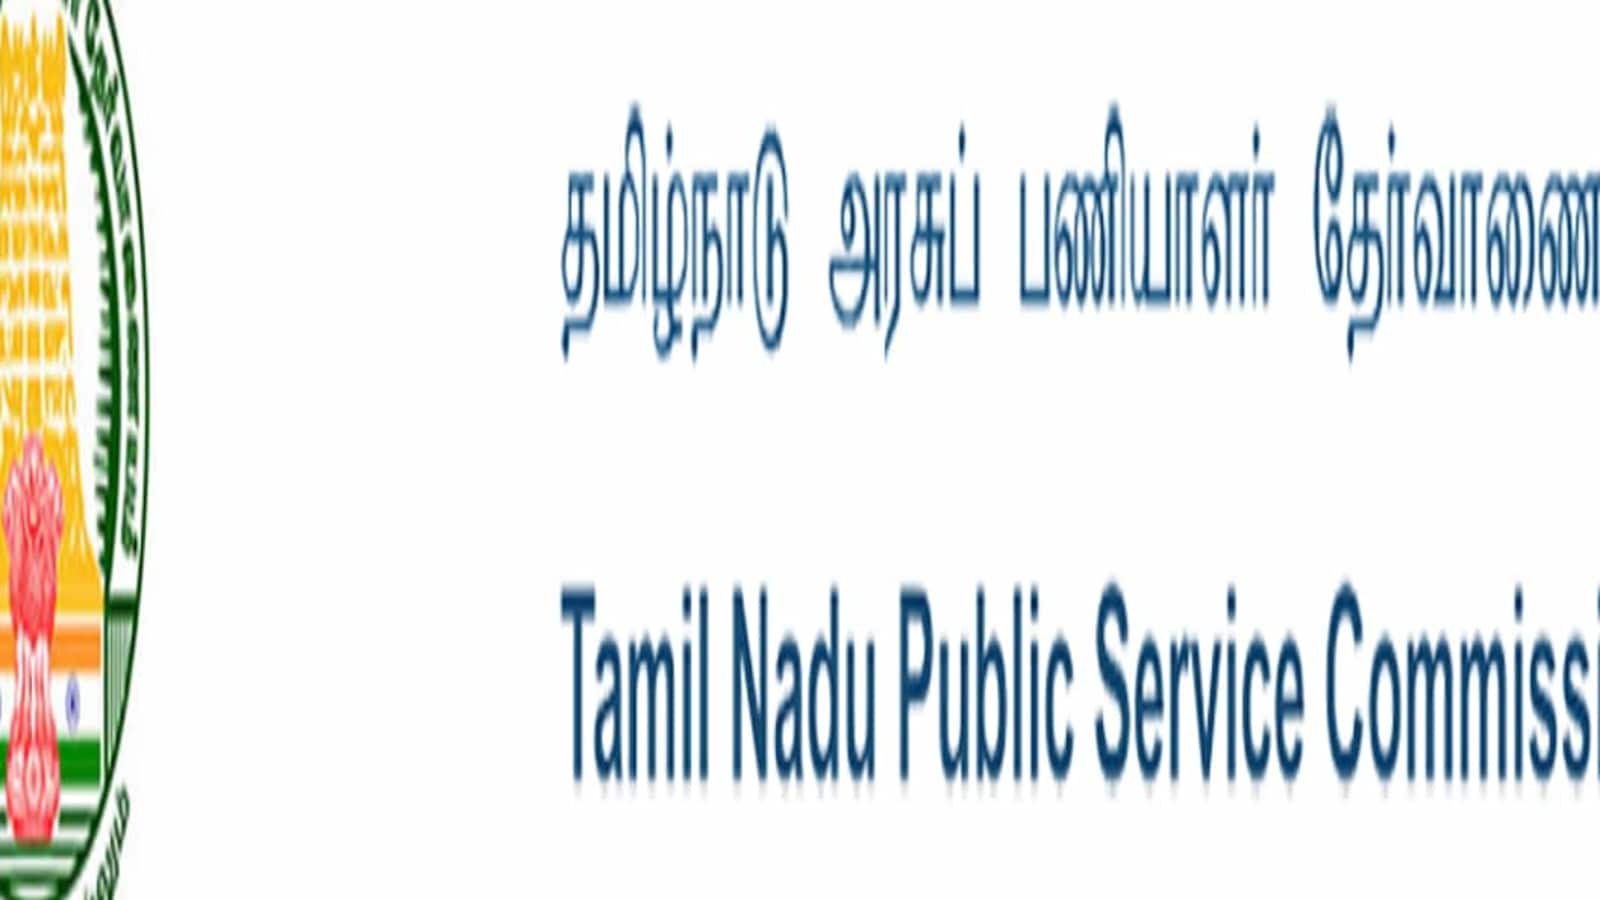 TNPSC CCS Exam: Phase II counselling dates released on tnpsc.gov.in